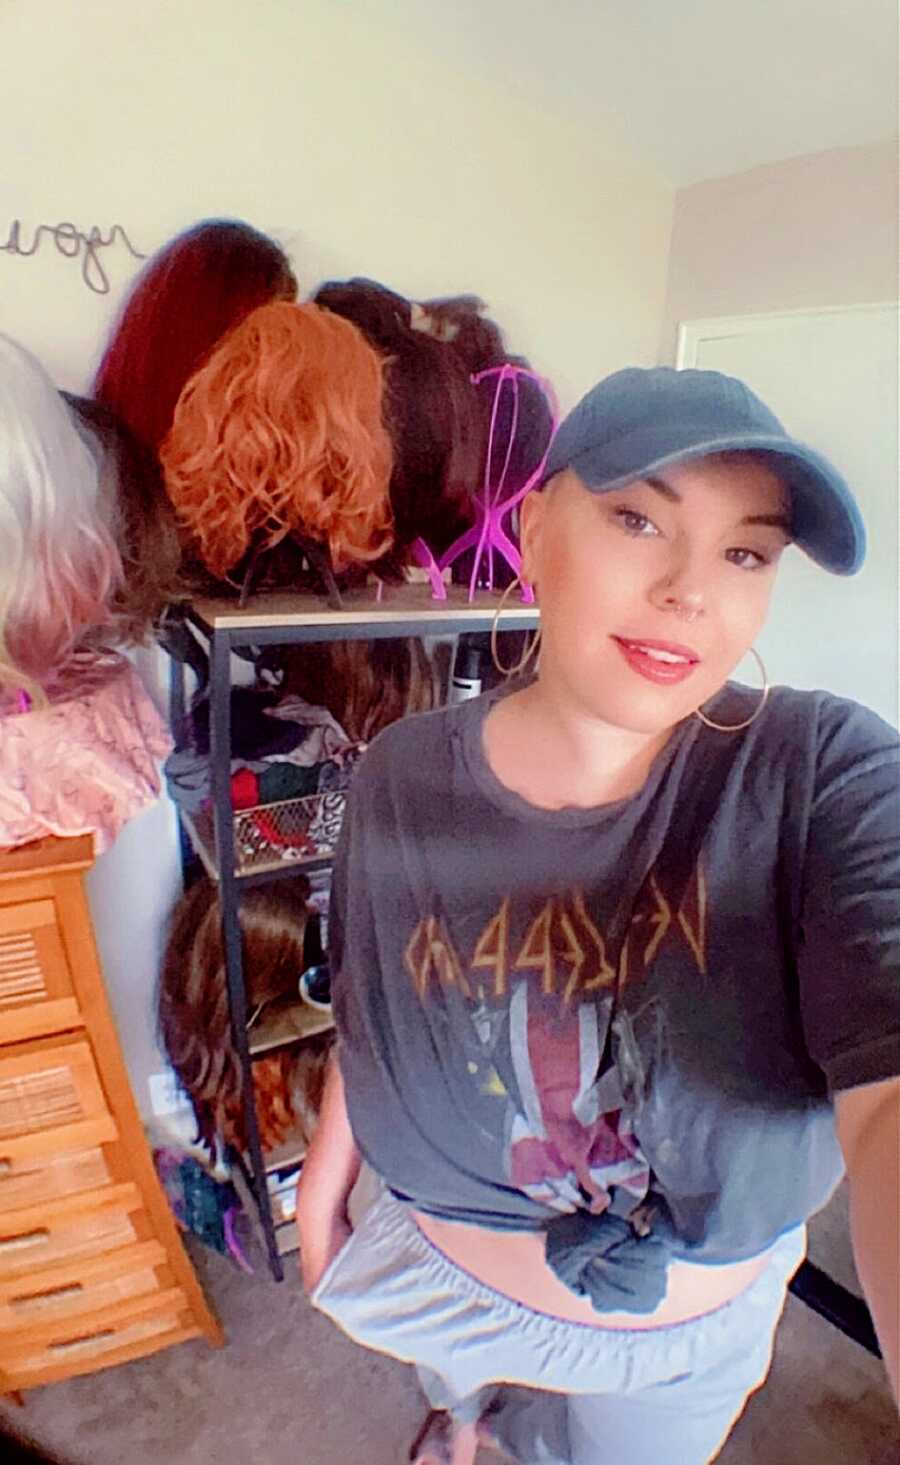 A woman wearing a baseball cap stands in front of her wigs